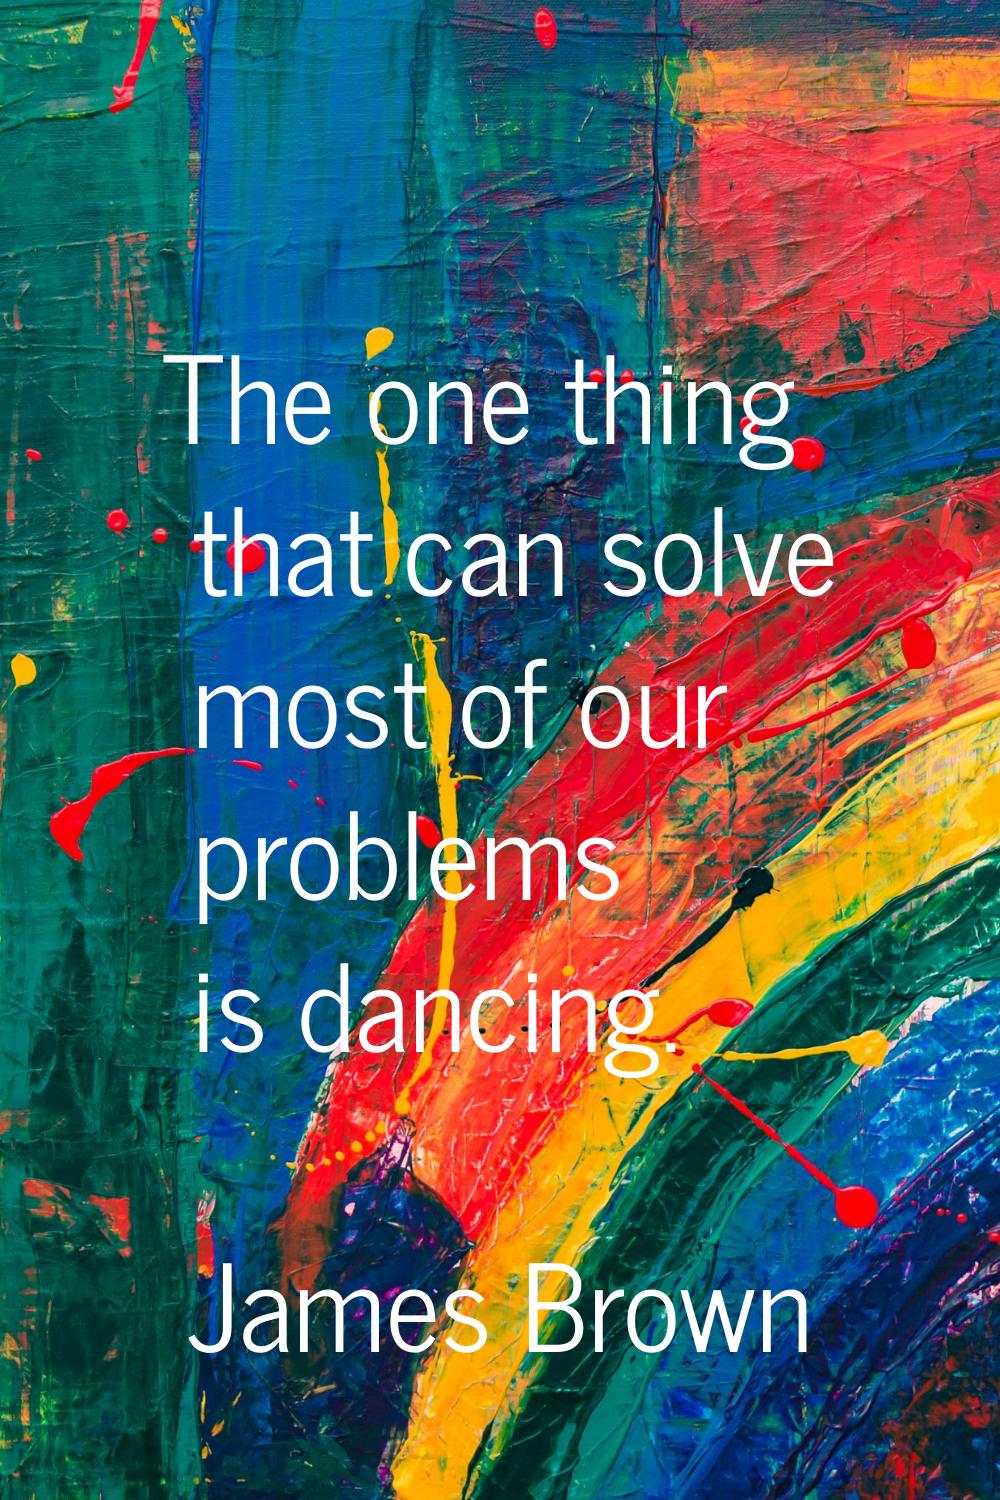 The one thing that can solve most of our problems is dancing.